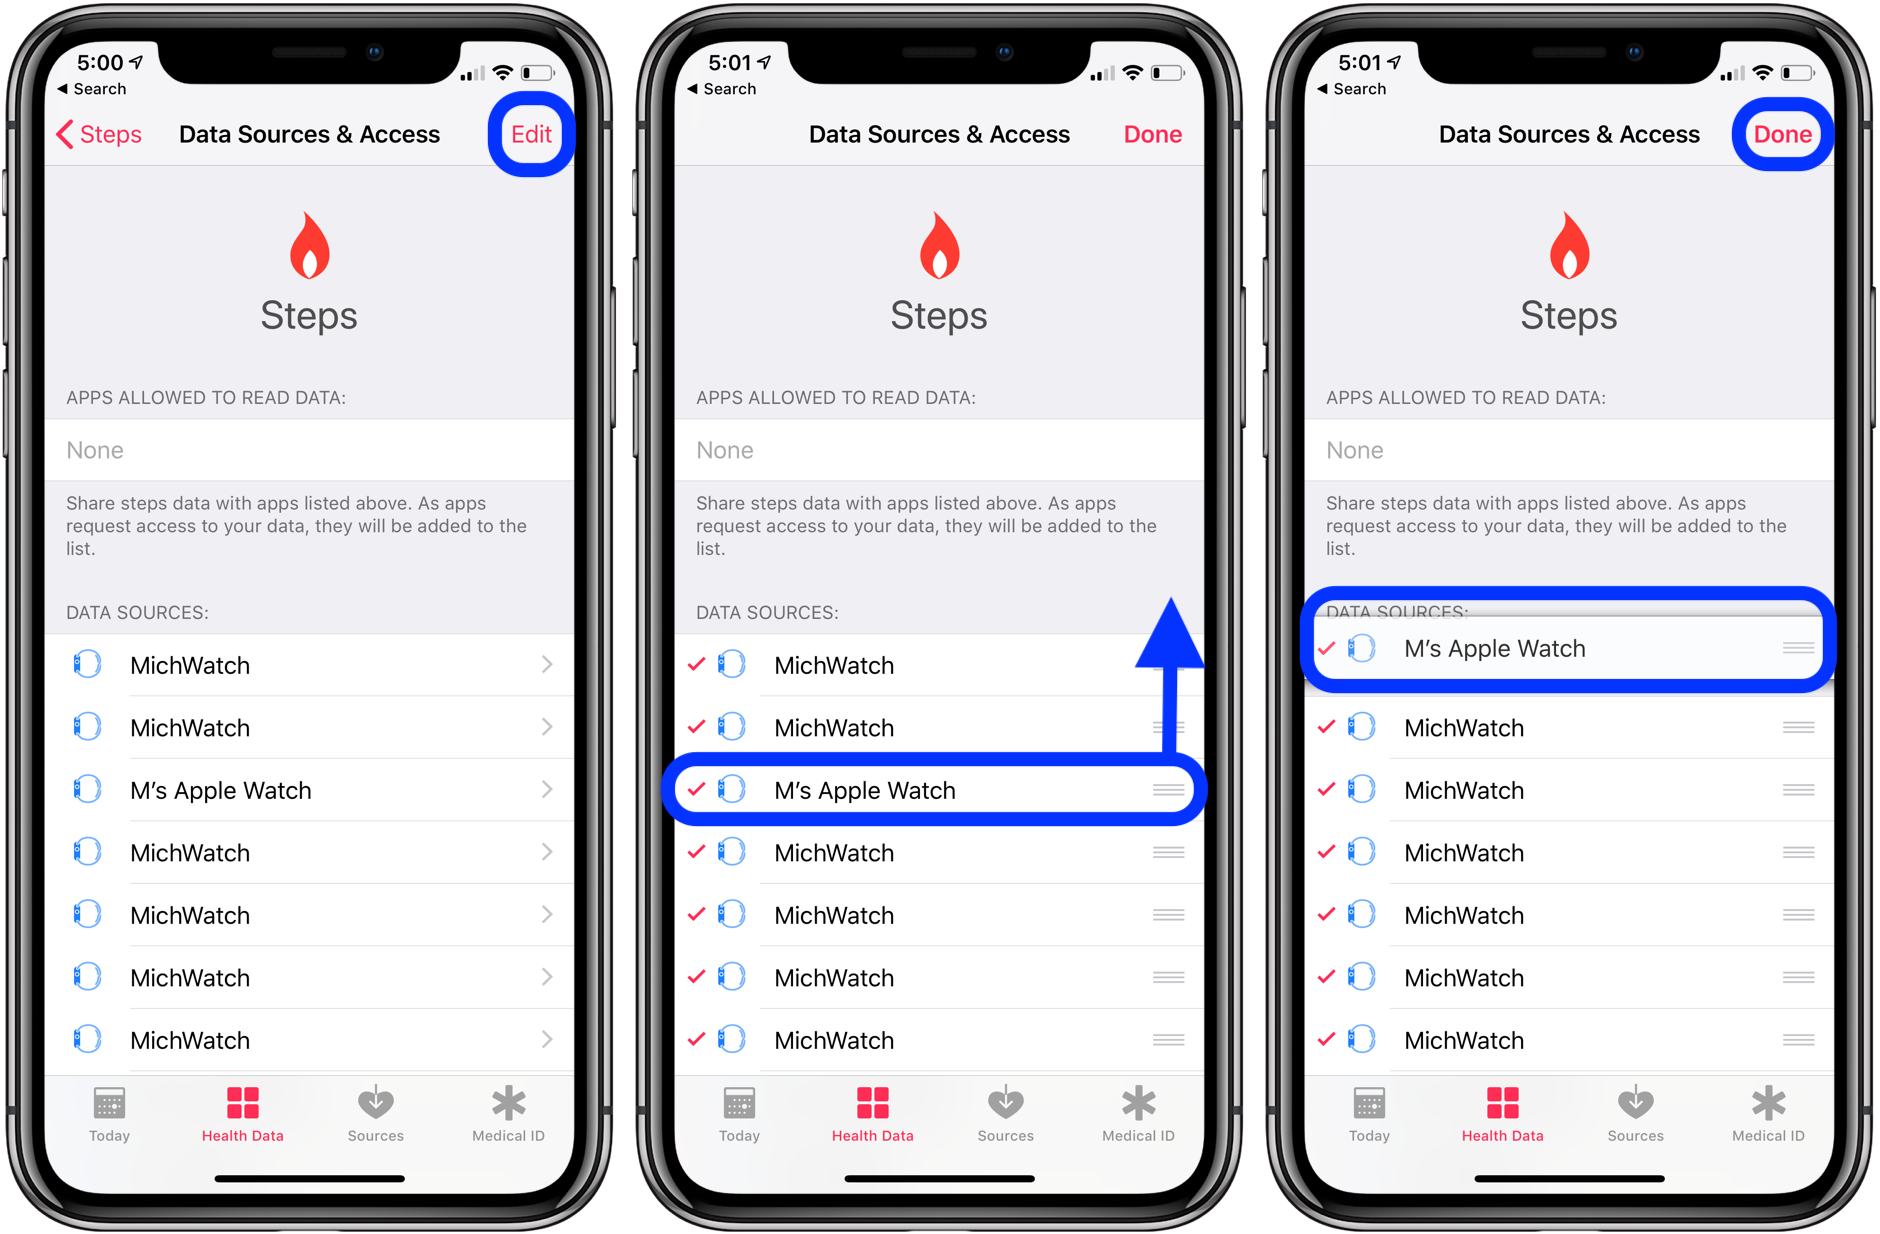 https://9to5mac.com/wp-content/uploads/sites/6/2019/07/prioritize-apple-health-sources-iphone-walkthrough-2.png